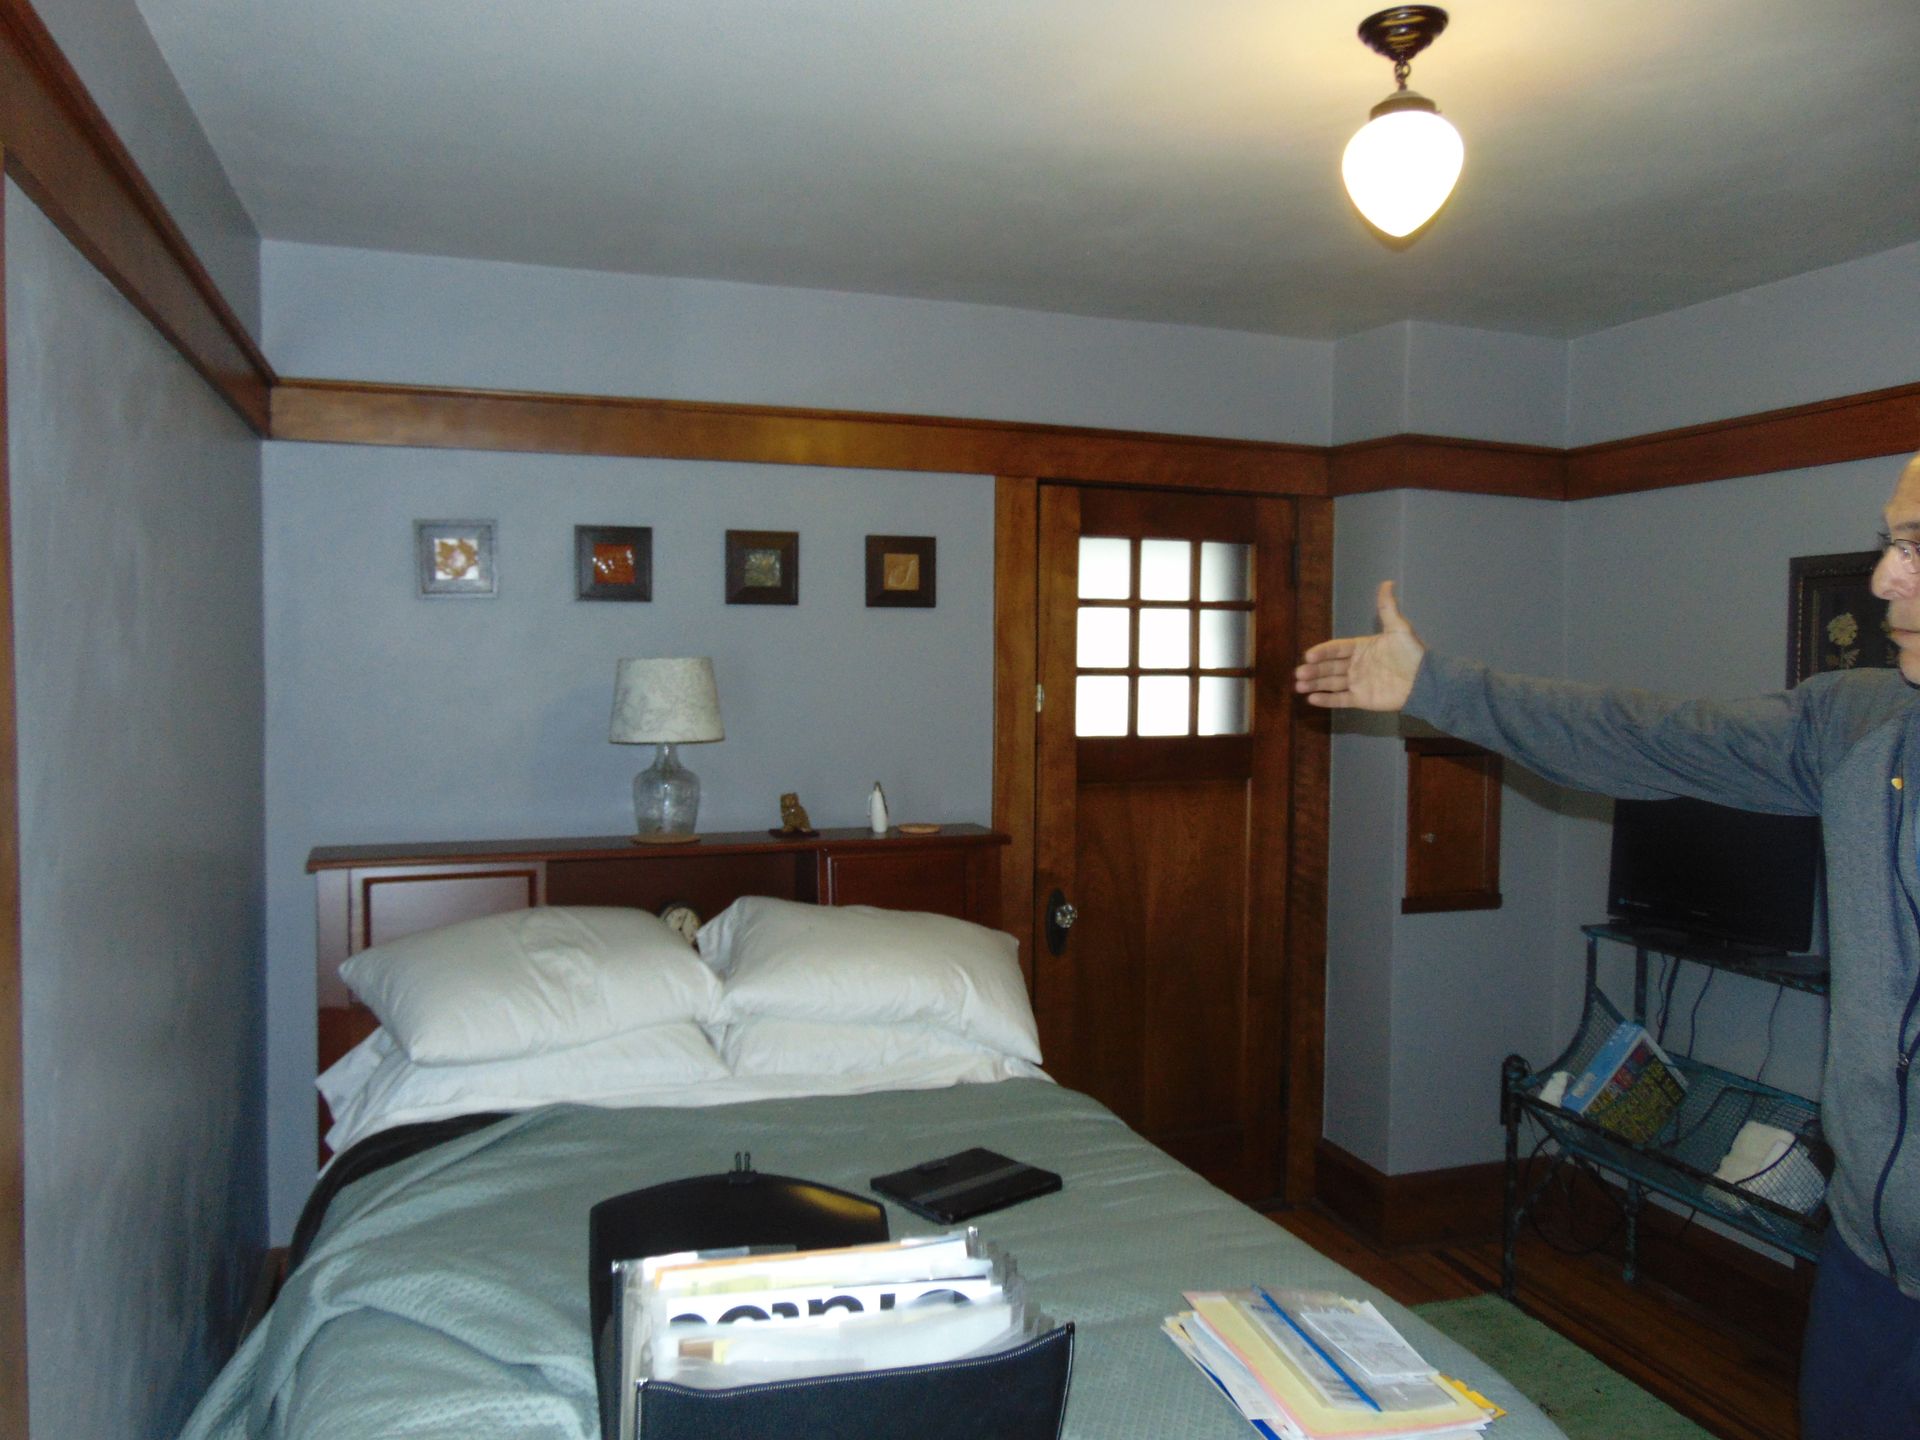 A man giving a thumbs up in a bedroom with a bed